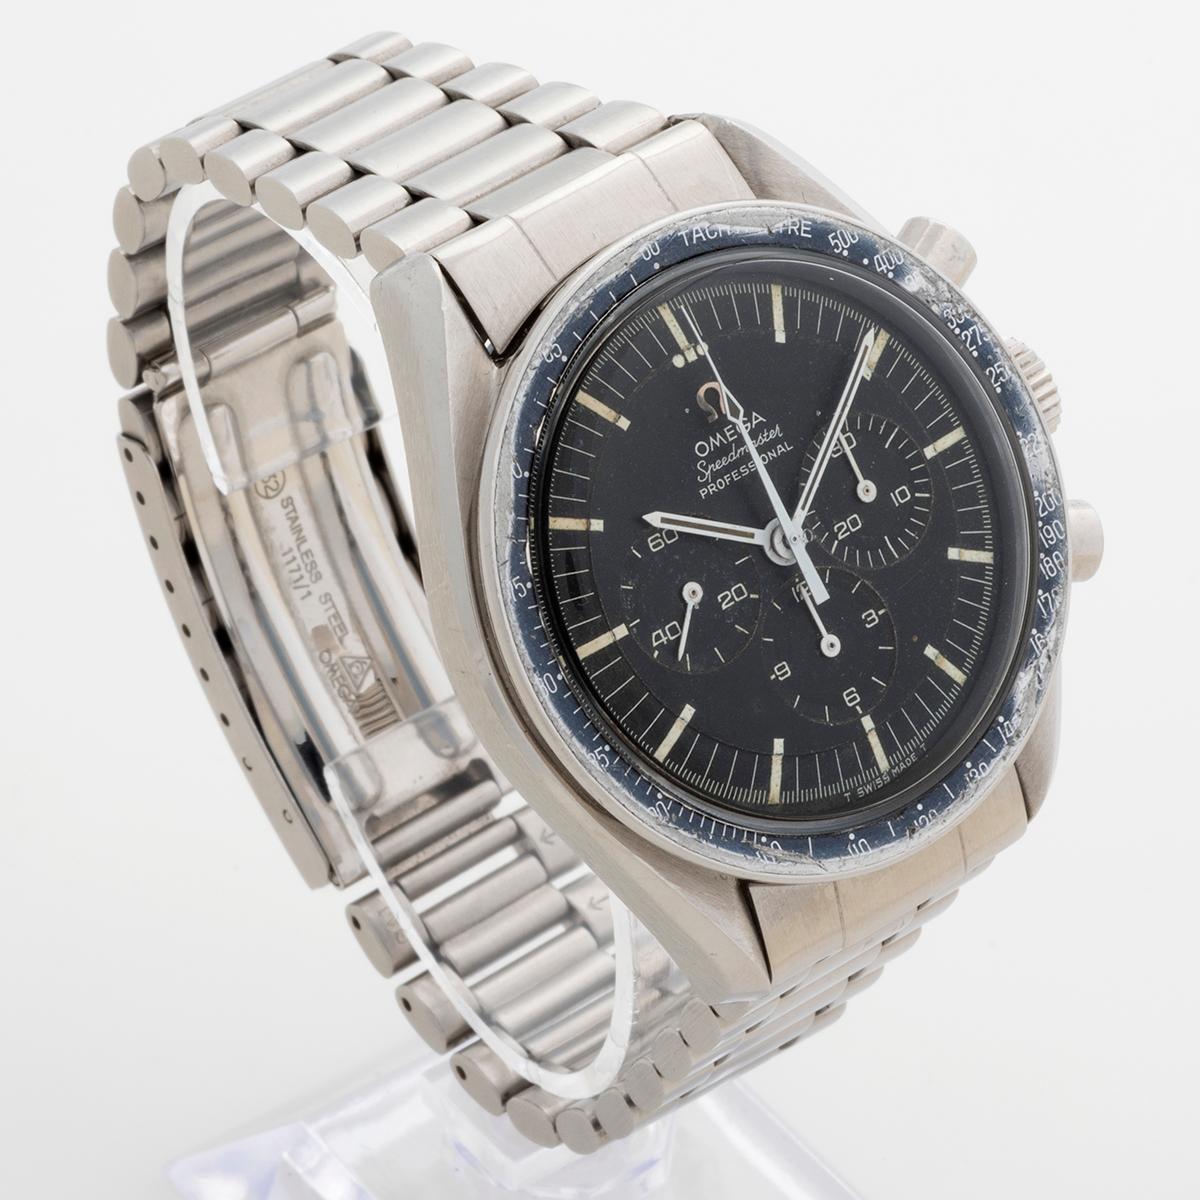 Our vintage and rare Omega Speedmaster reference ST145.012 with cal. 321 manual winding movement is presented in outstanding original condition. Our example features a correct ST145.012-67 caseback , 1171/1 bracelet with 633 end links and the